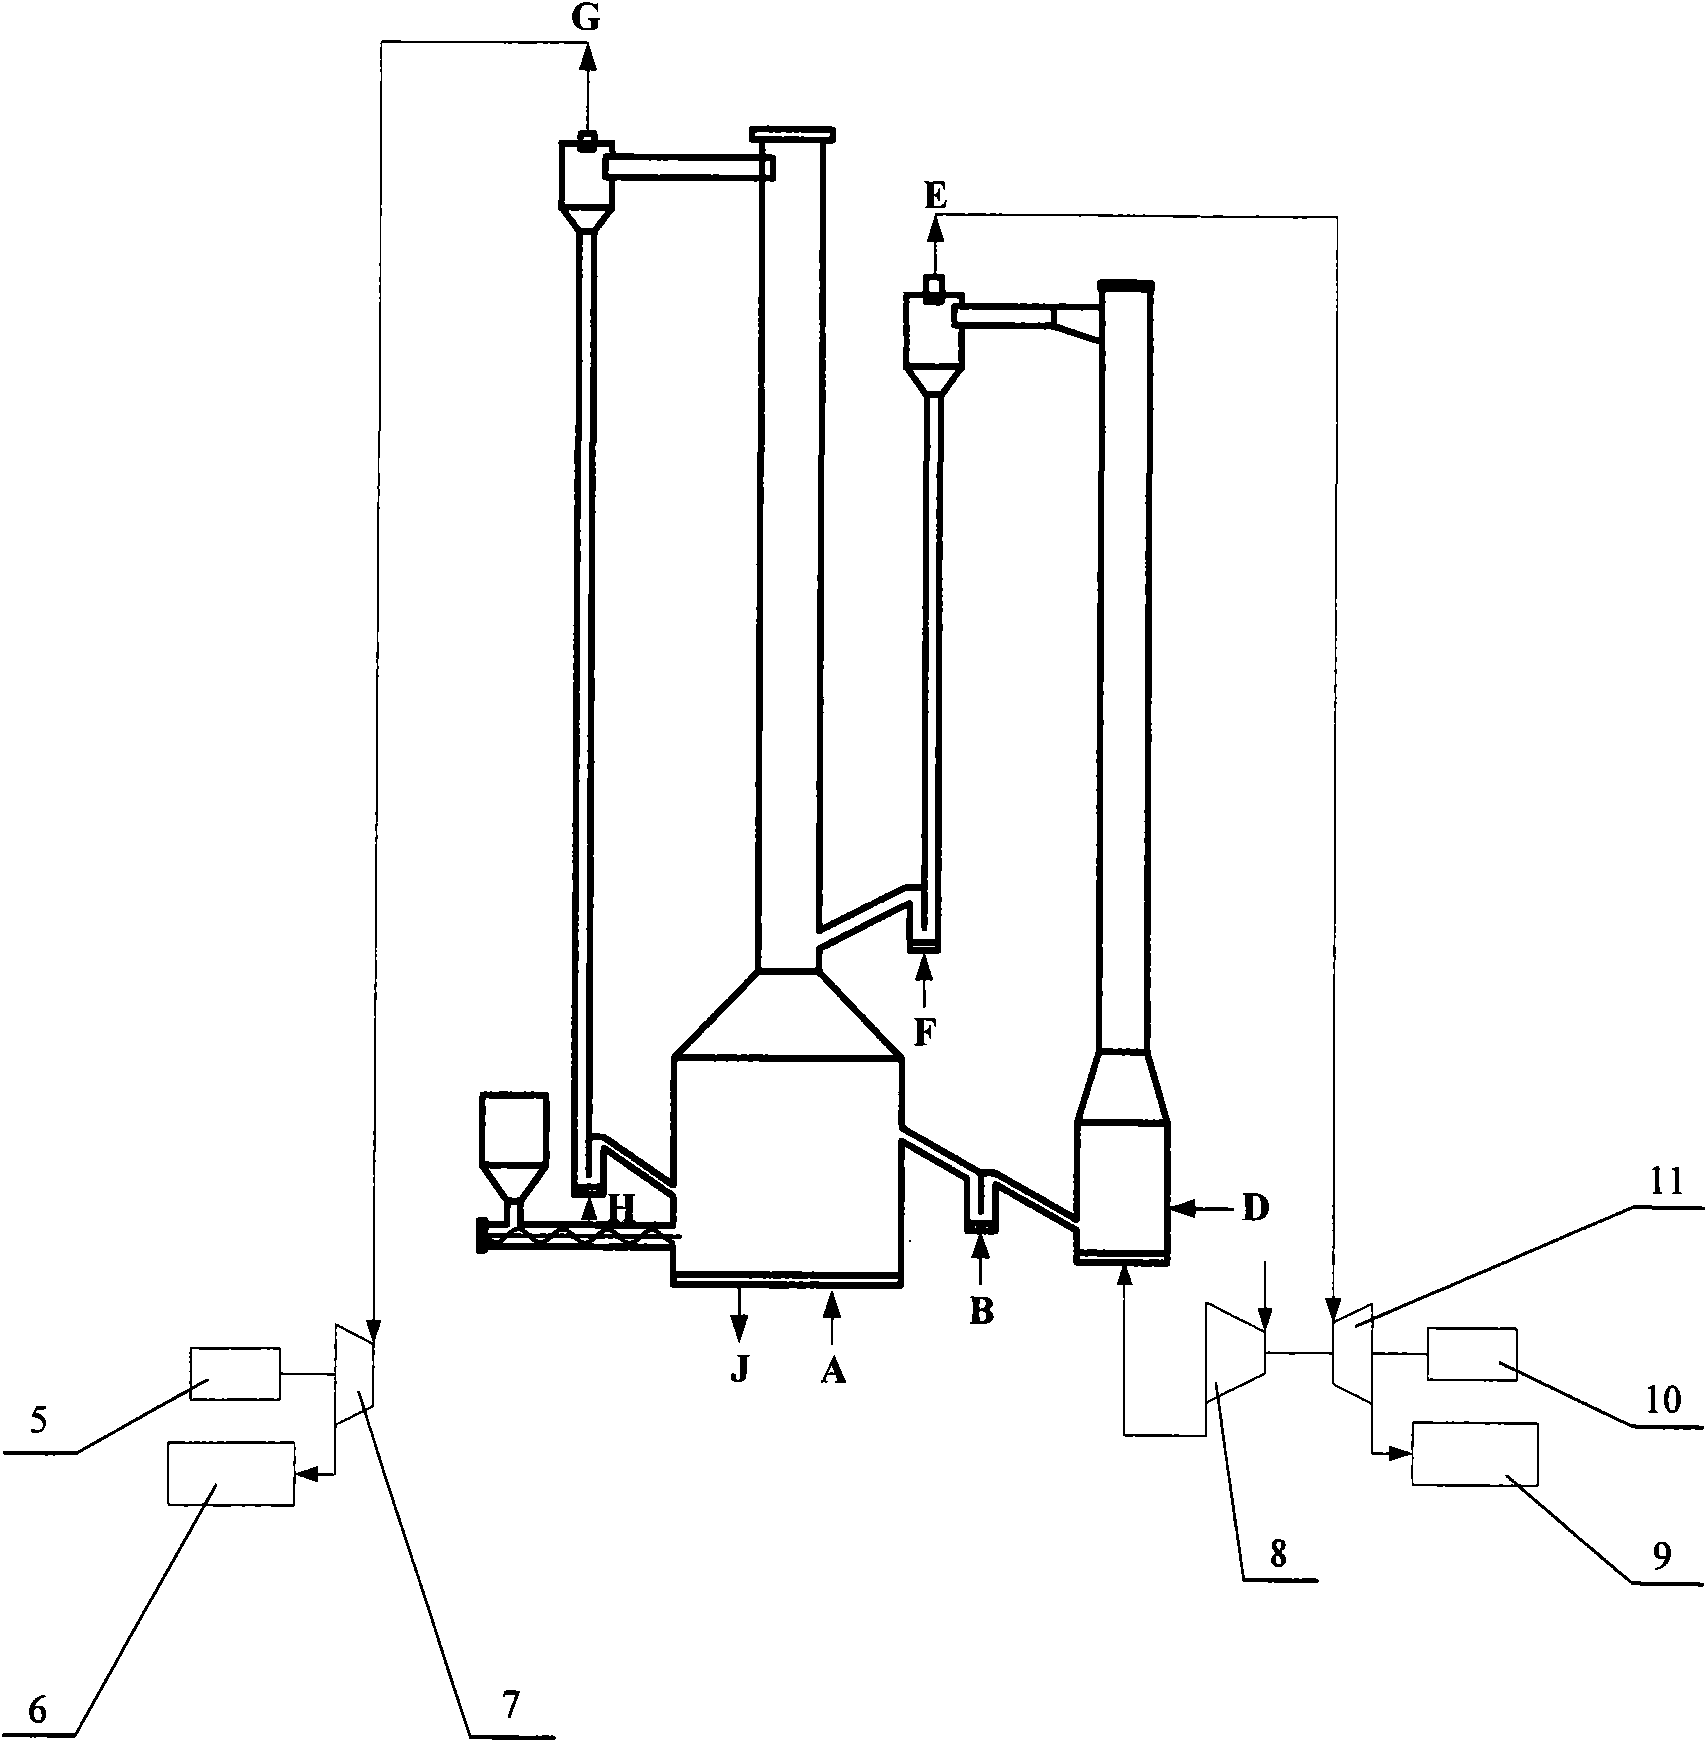 Method and device for burning chemistry chains based on iron or iron oxide